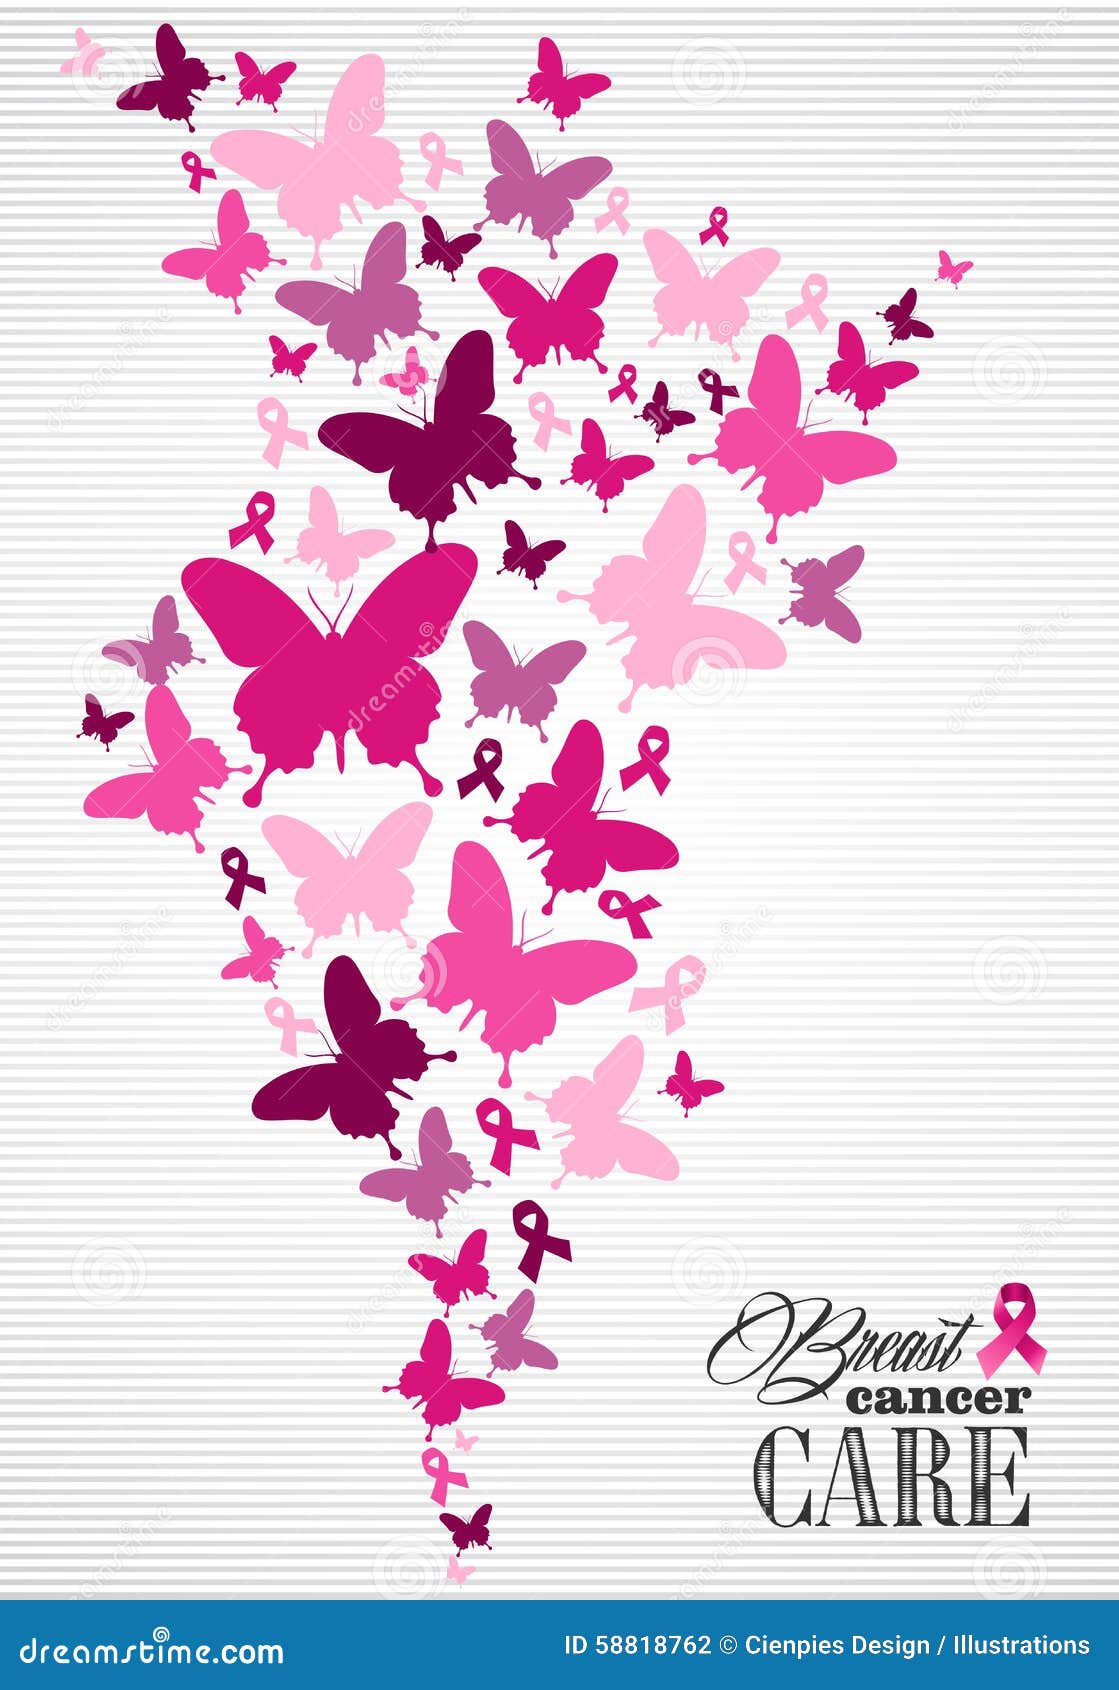 Butterfly Cancer Ribbon Stock Illustrations – 1,075 Butterfly